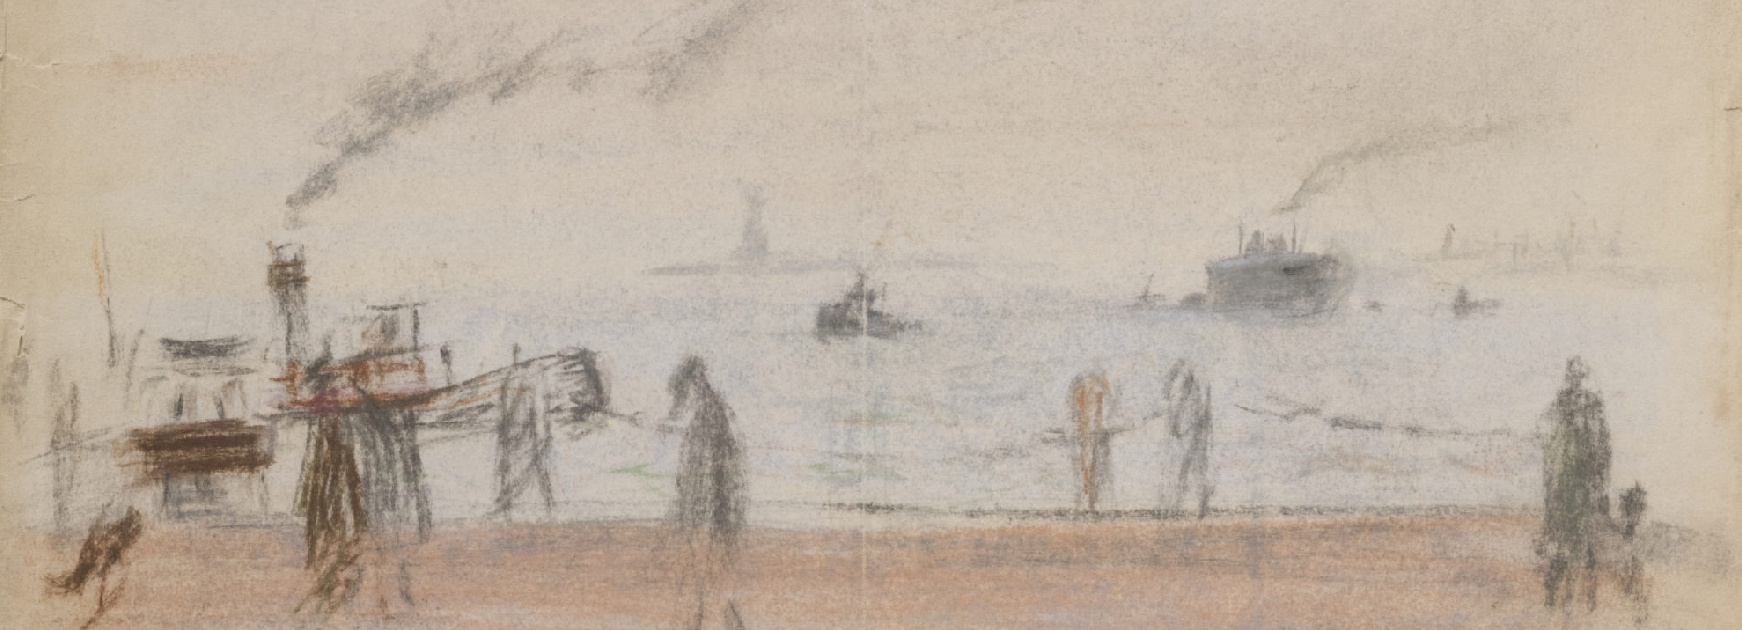 Crayon on paper sketch of figures and boats by Clyfford Still